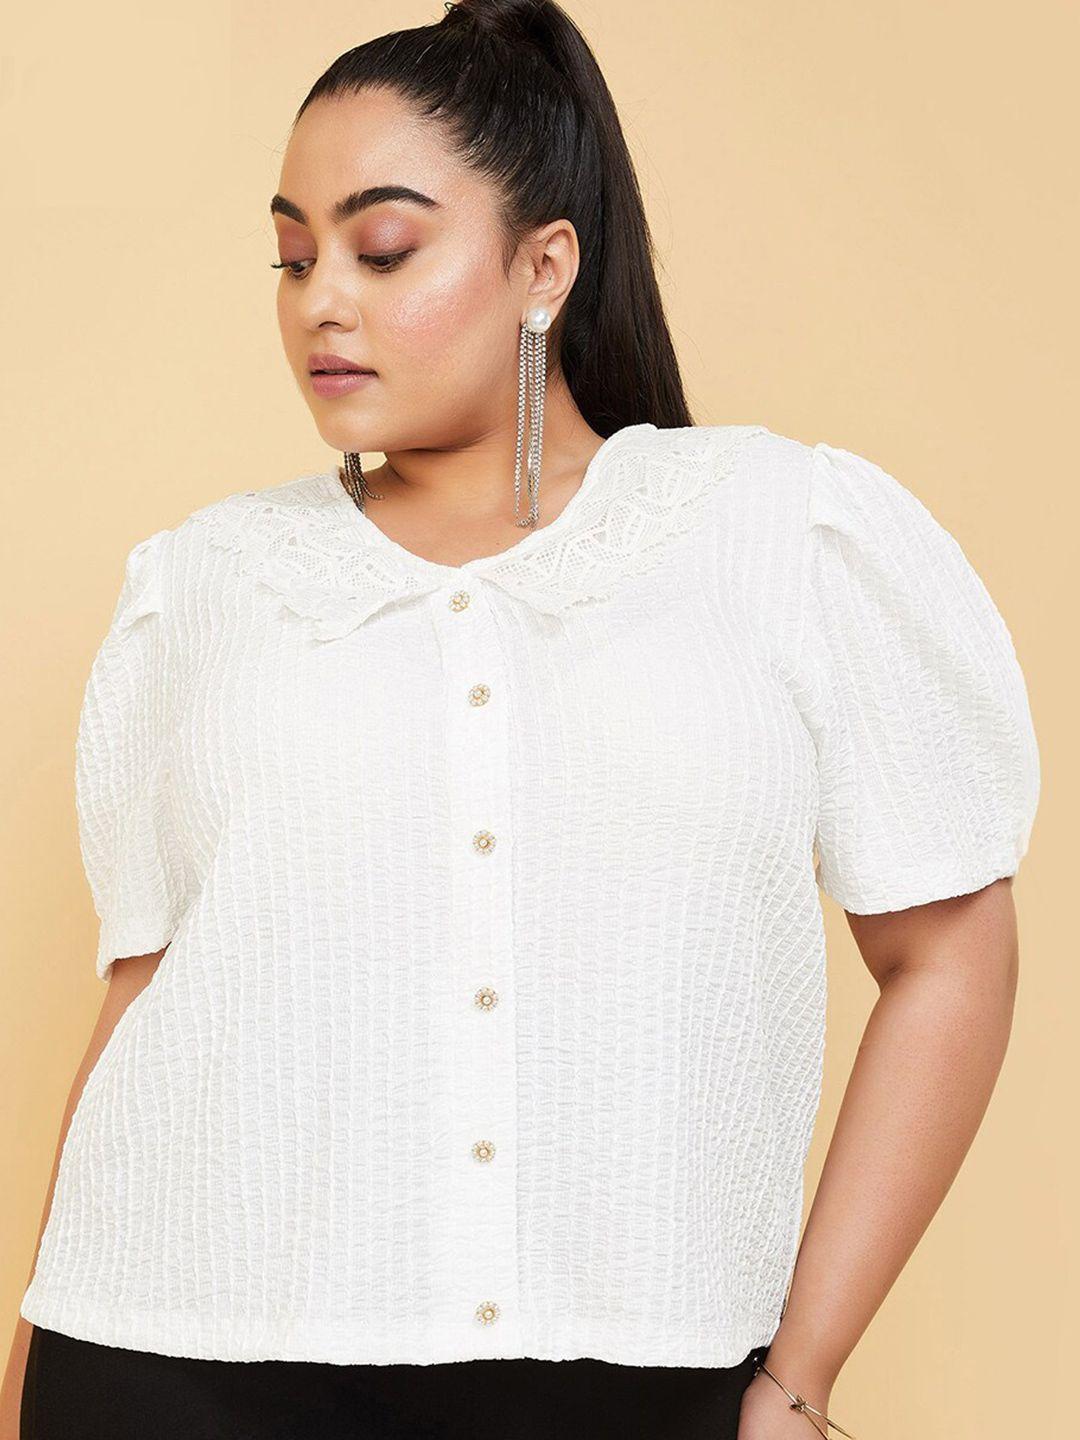 max plus size striped puff sleeves shirt style top